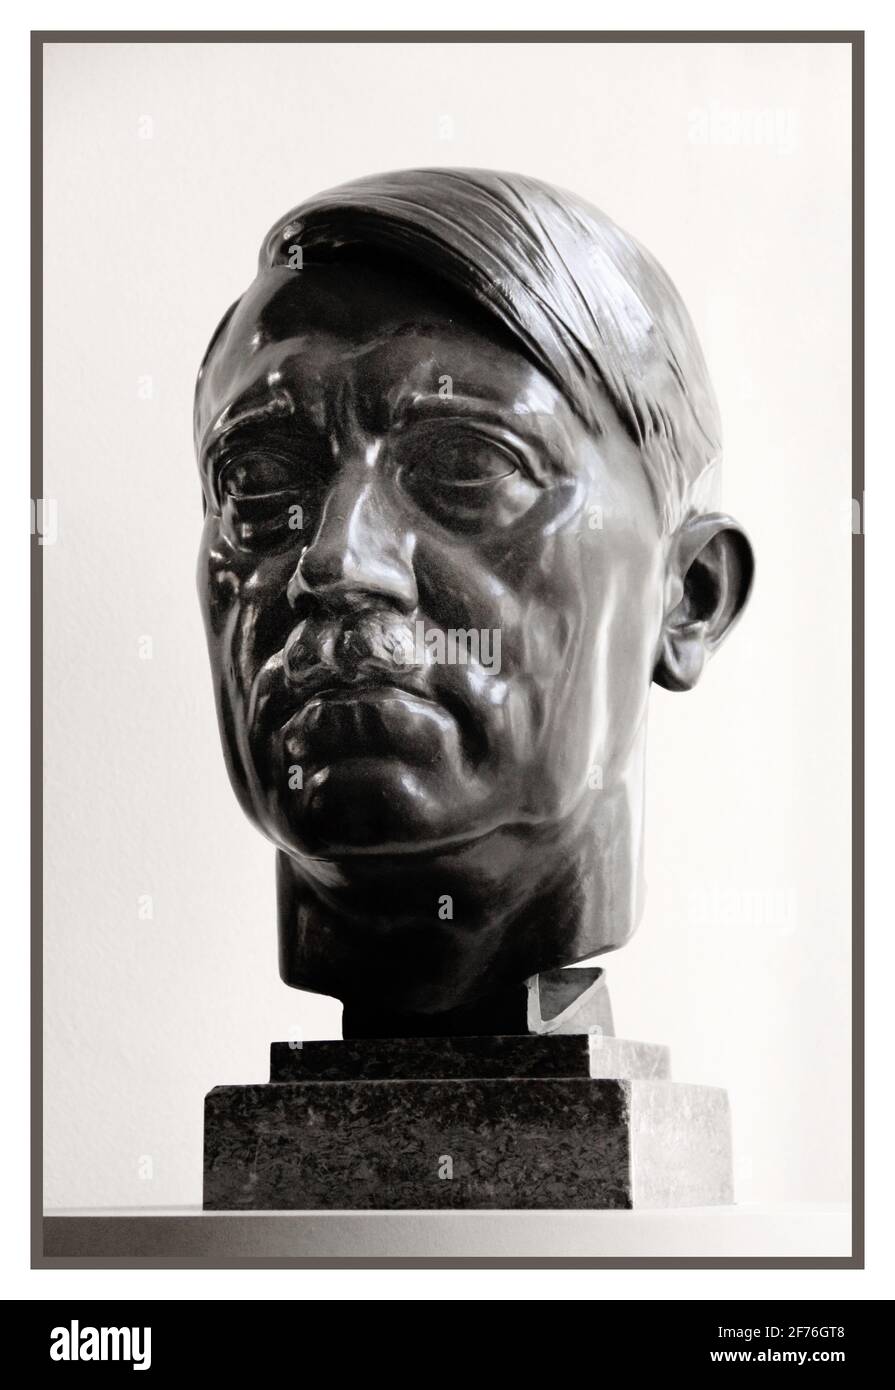 ADOLF HITLER BUST STATUE 1930's Bust of Fuhrer Adolf Hitler many of these were produced to be placed in important buildings across Nazi Germany Stock Photo